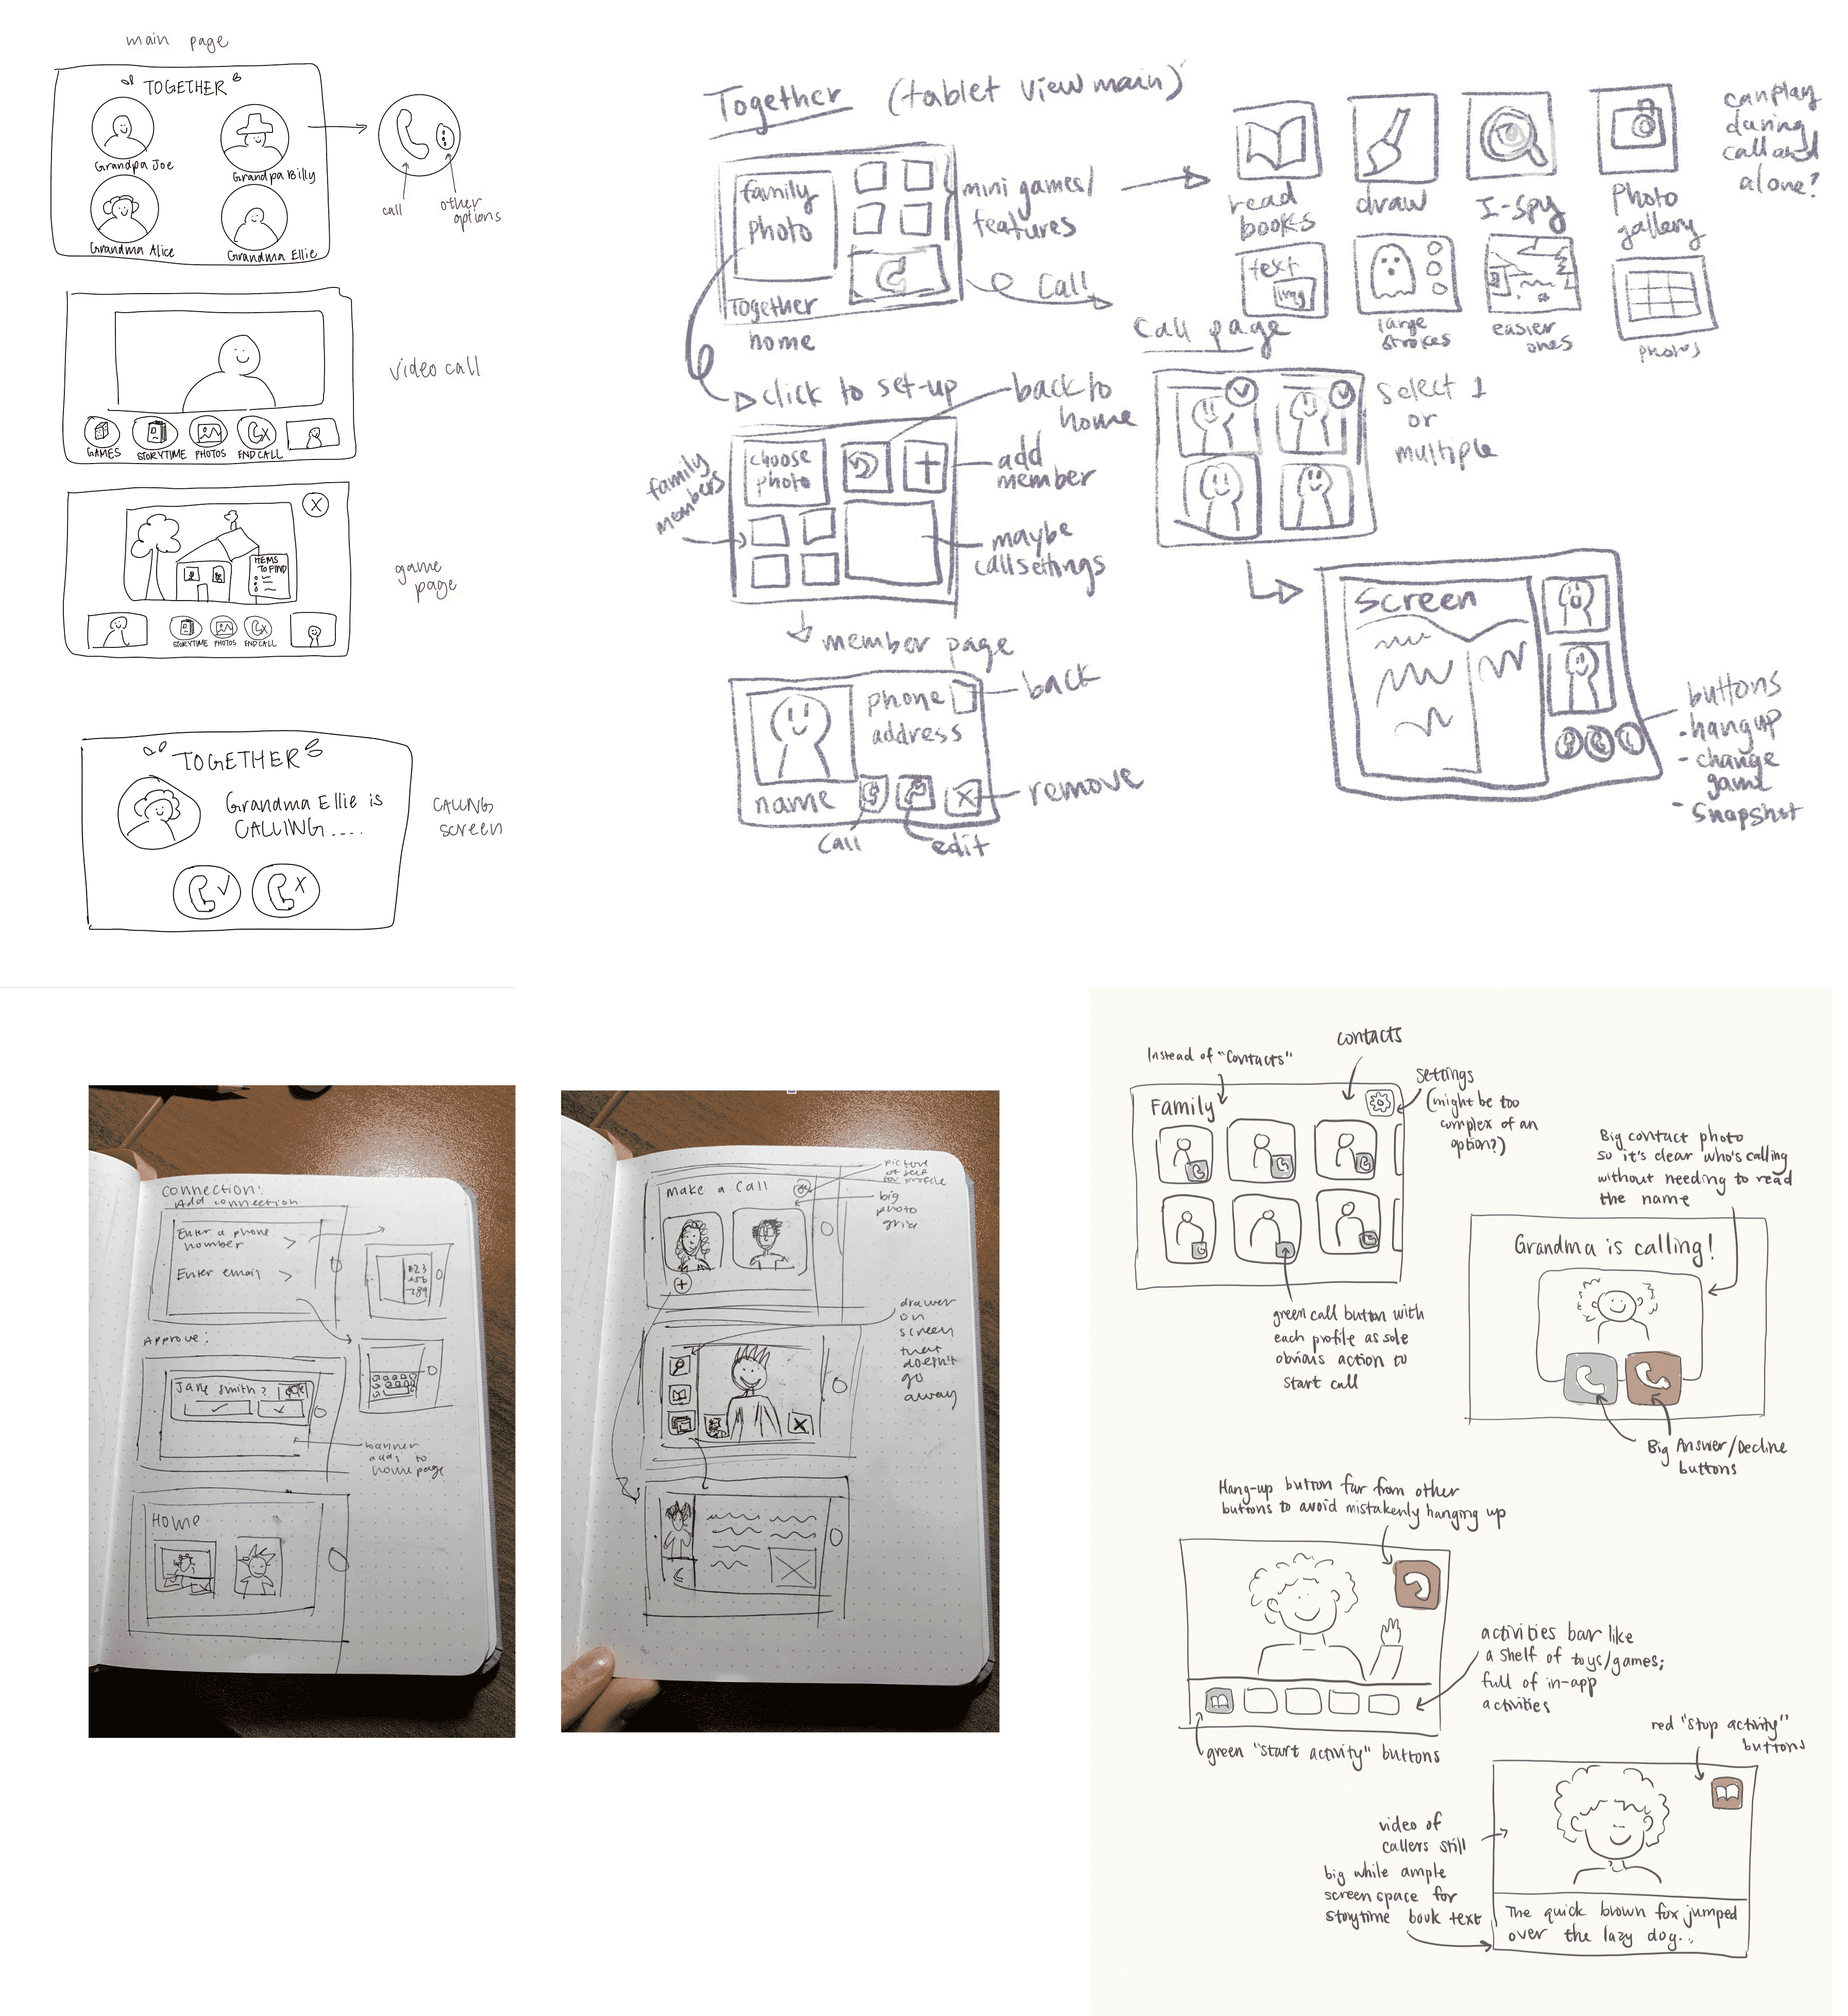 Initial sketches of Together Video App Interface